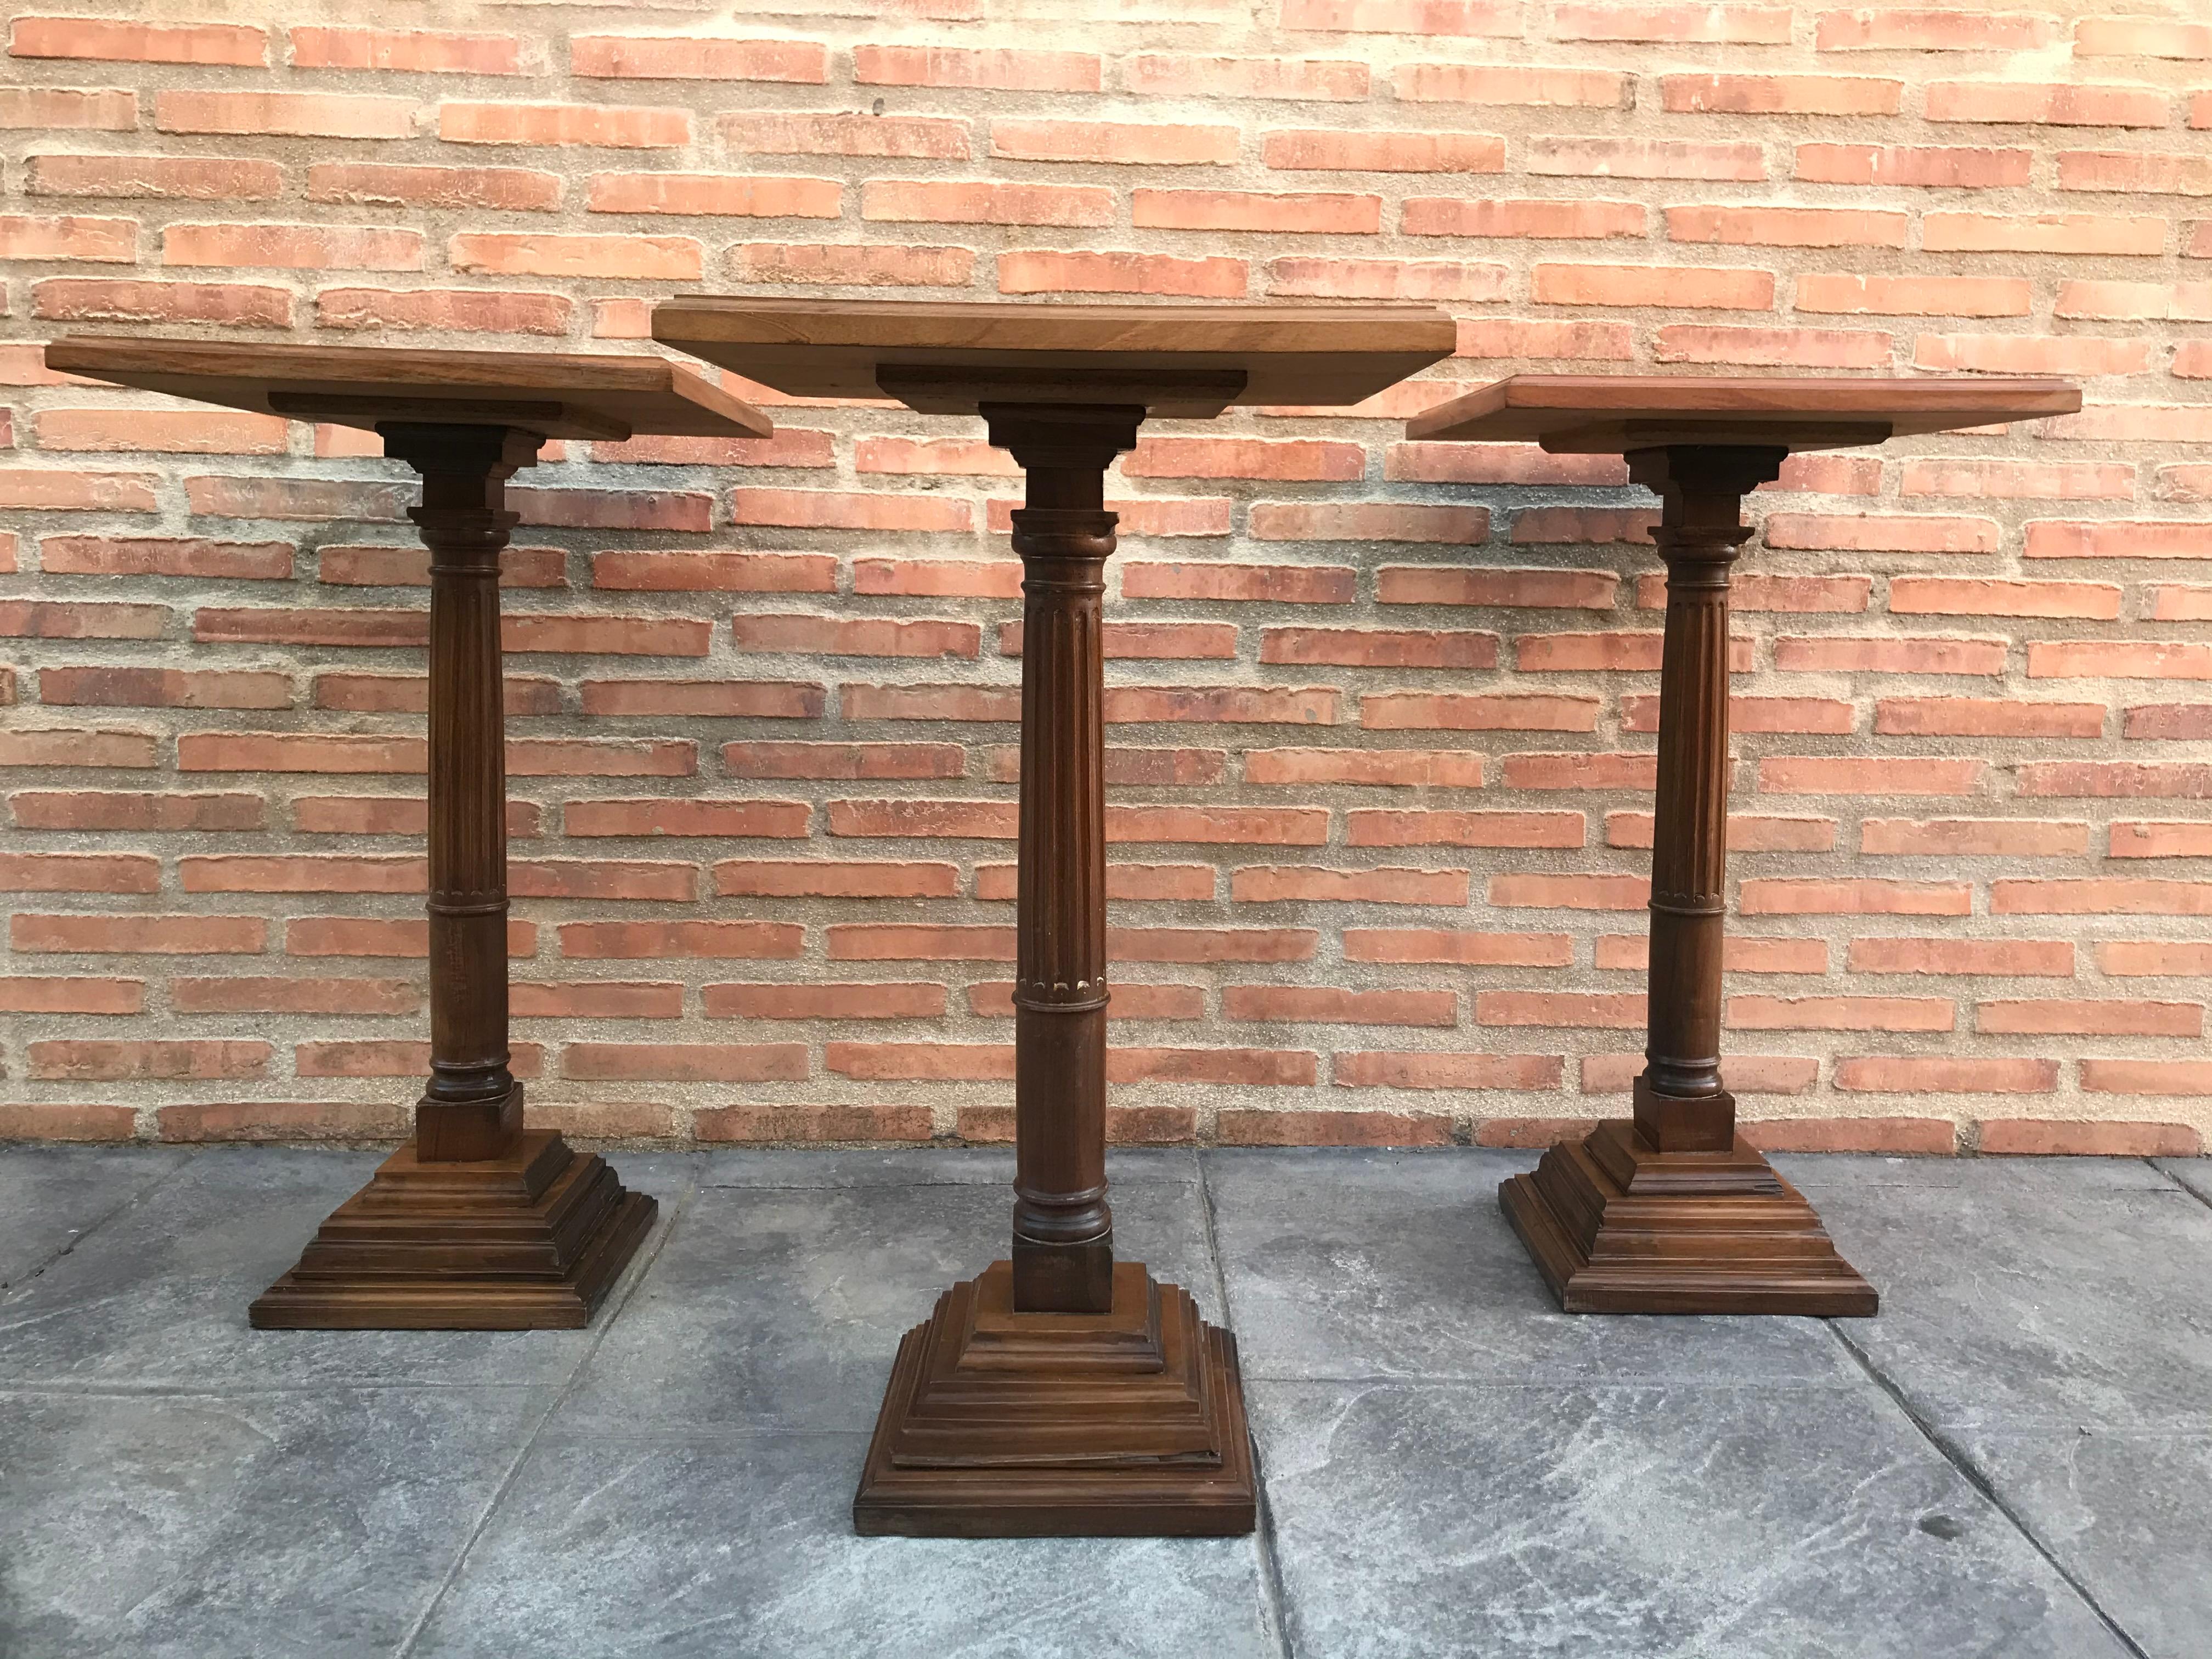 French Provincial Mid-20th Century Set of Three Walnut Wood Square Top Pedestal Tables For Sale